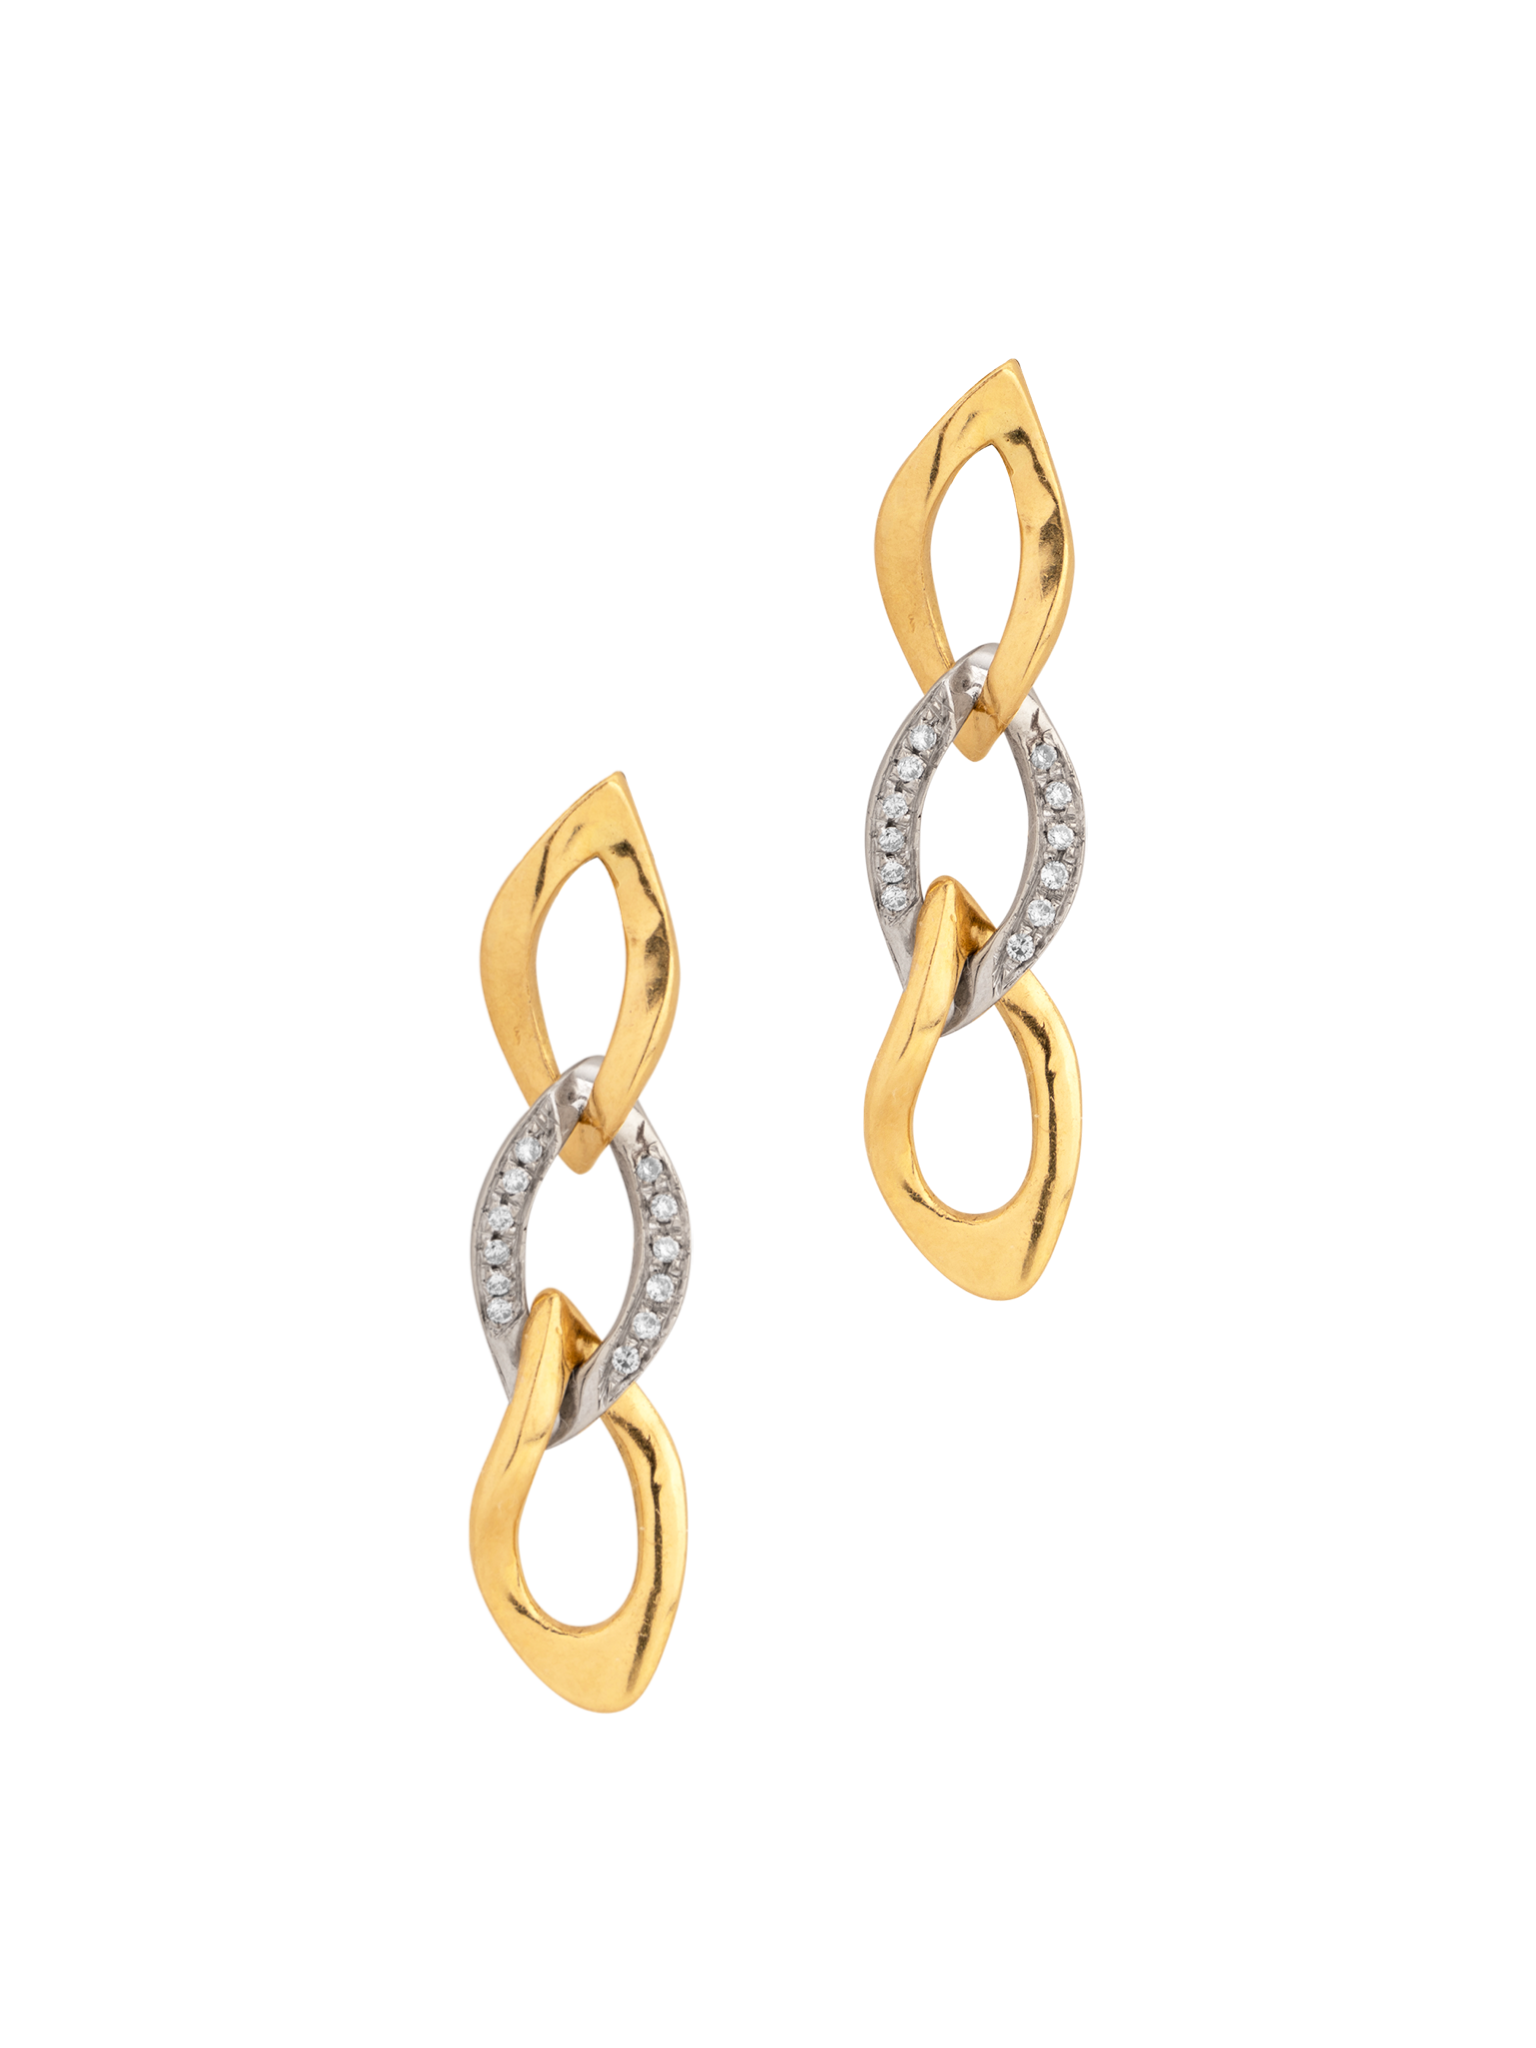 Chain drop yellow gold and white diamond earrings